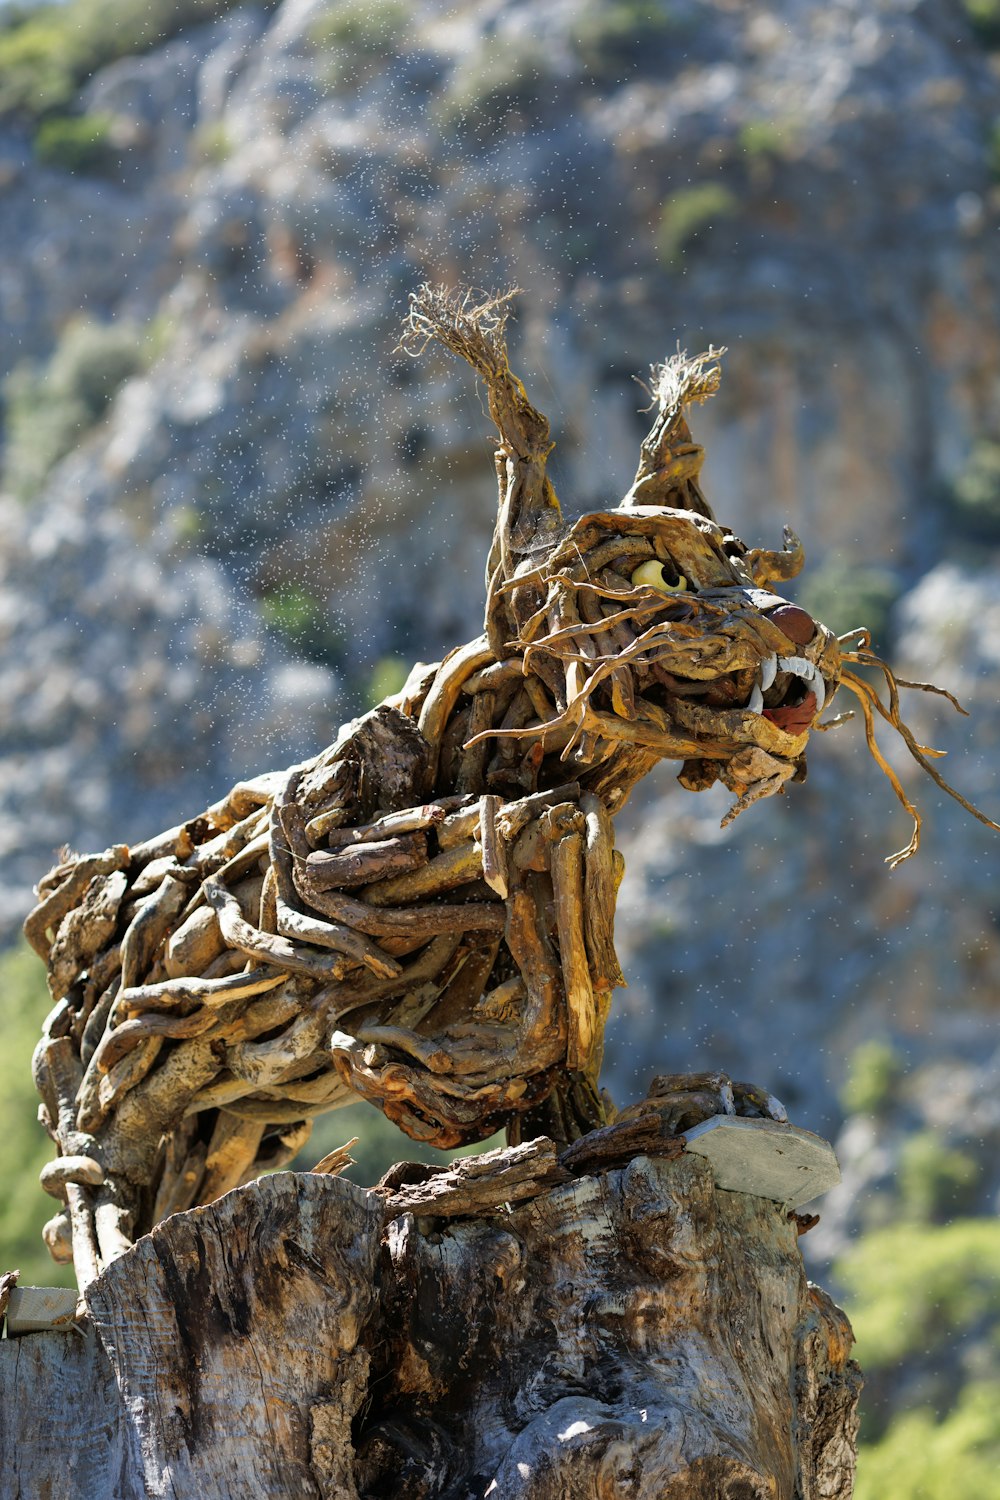 a sculpture of a dog made out of driftwood